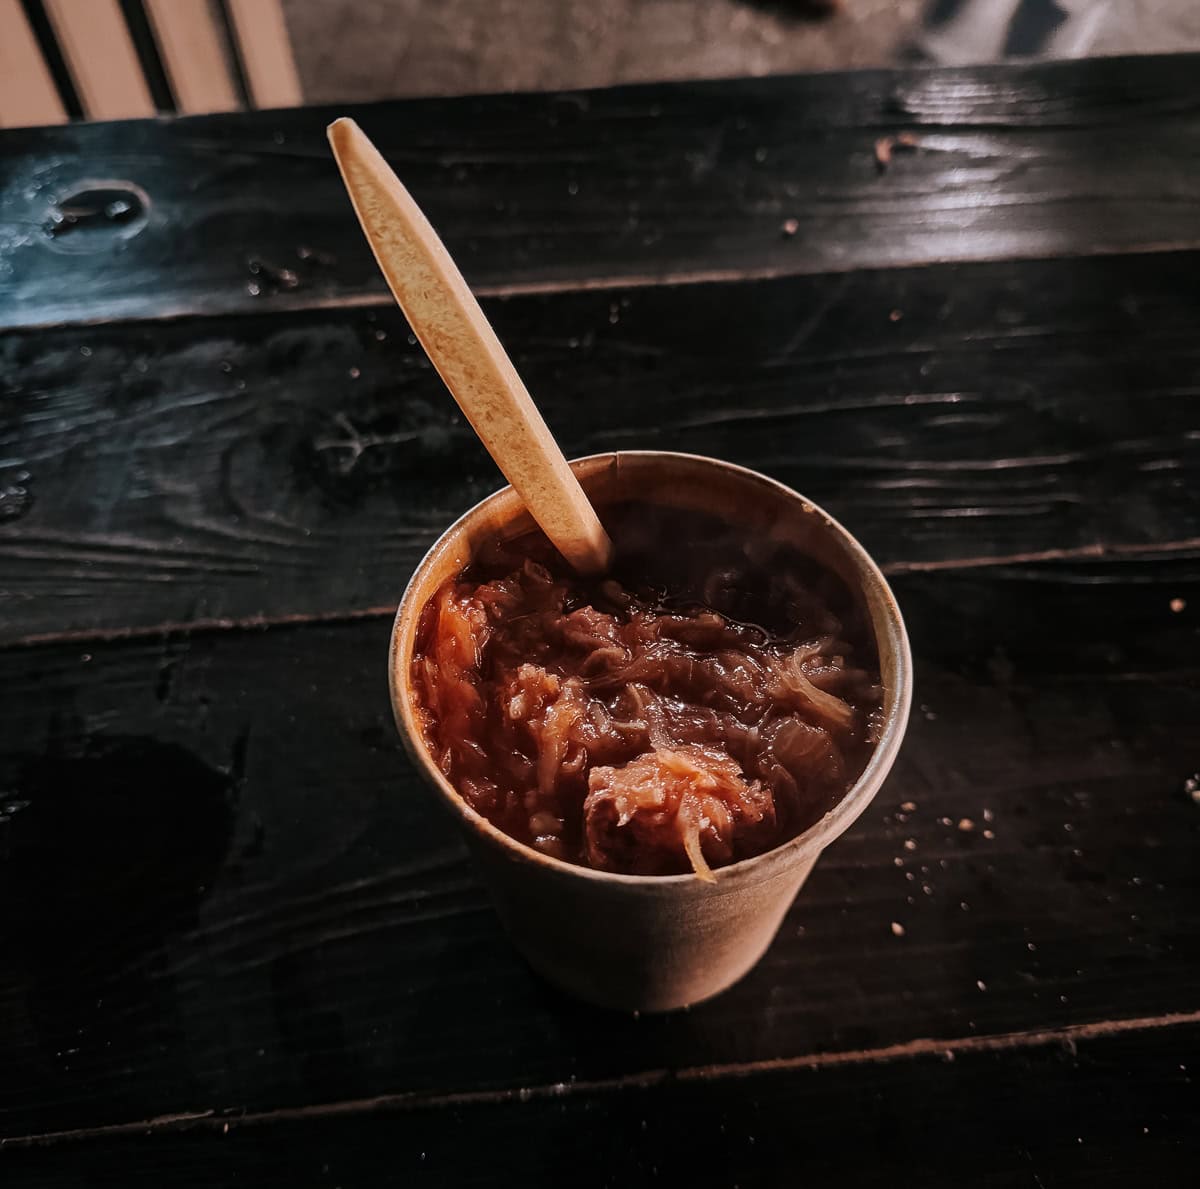 A paper cup of steaming bigos (traditional Polish stew of cabbage and meat) on a dark wooden table, with a wooden spoon, captured in an intimate, moody lighting